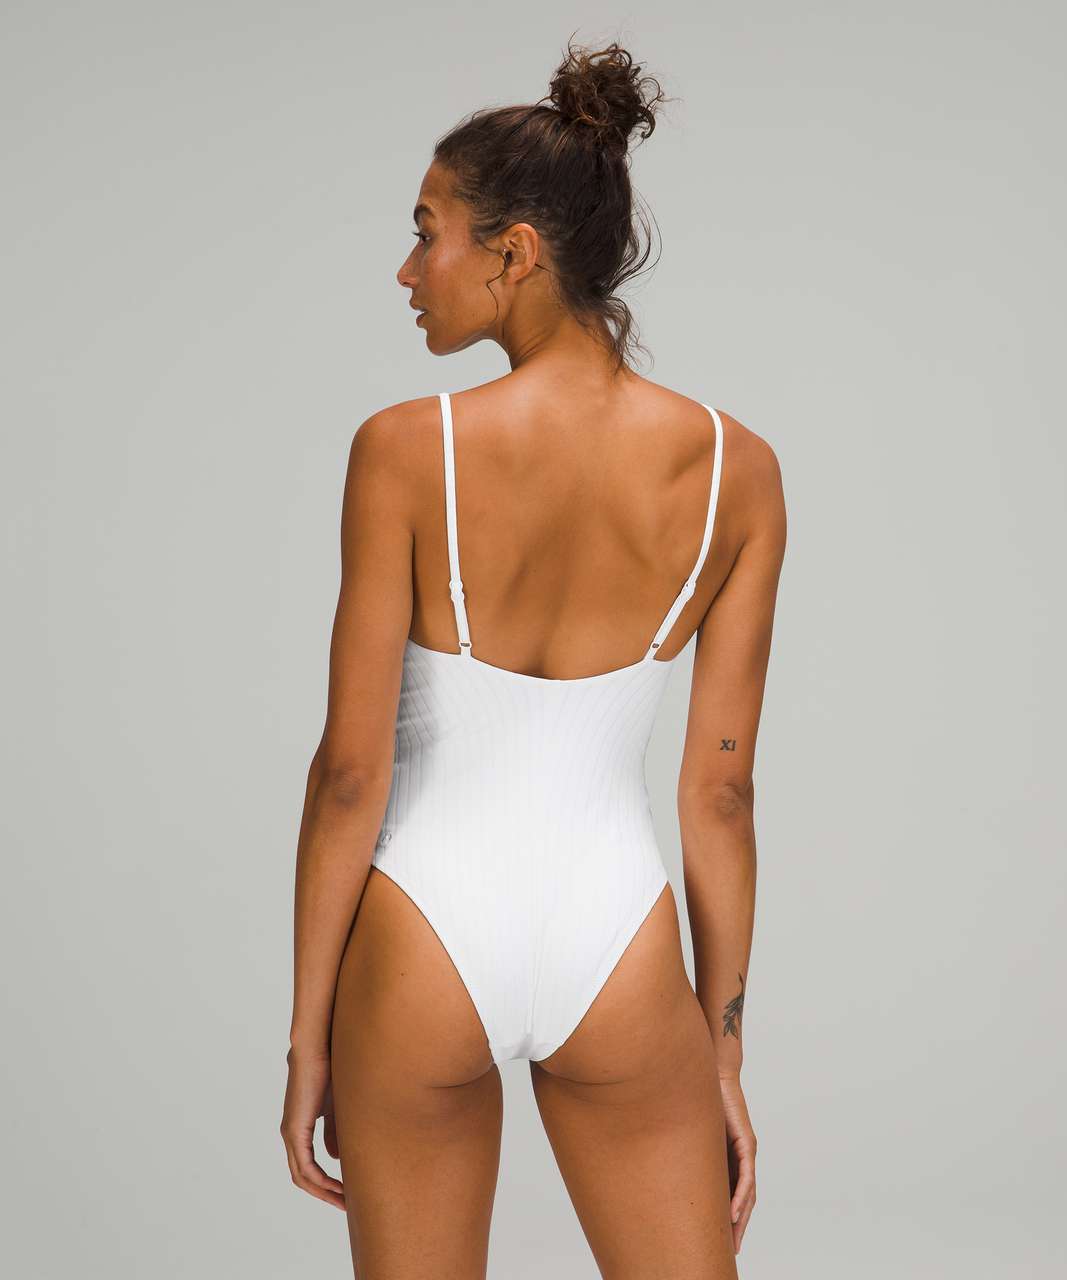 White One-Piece Swimsuit - Ribbed Swimsuit - Cutout Swimsuit - Lulus